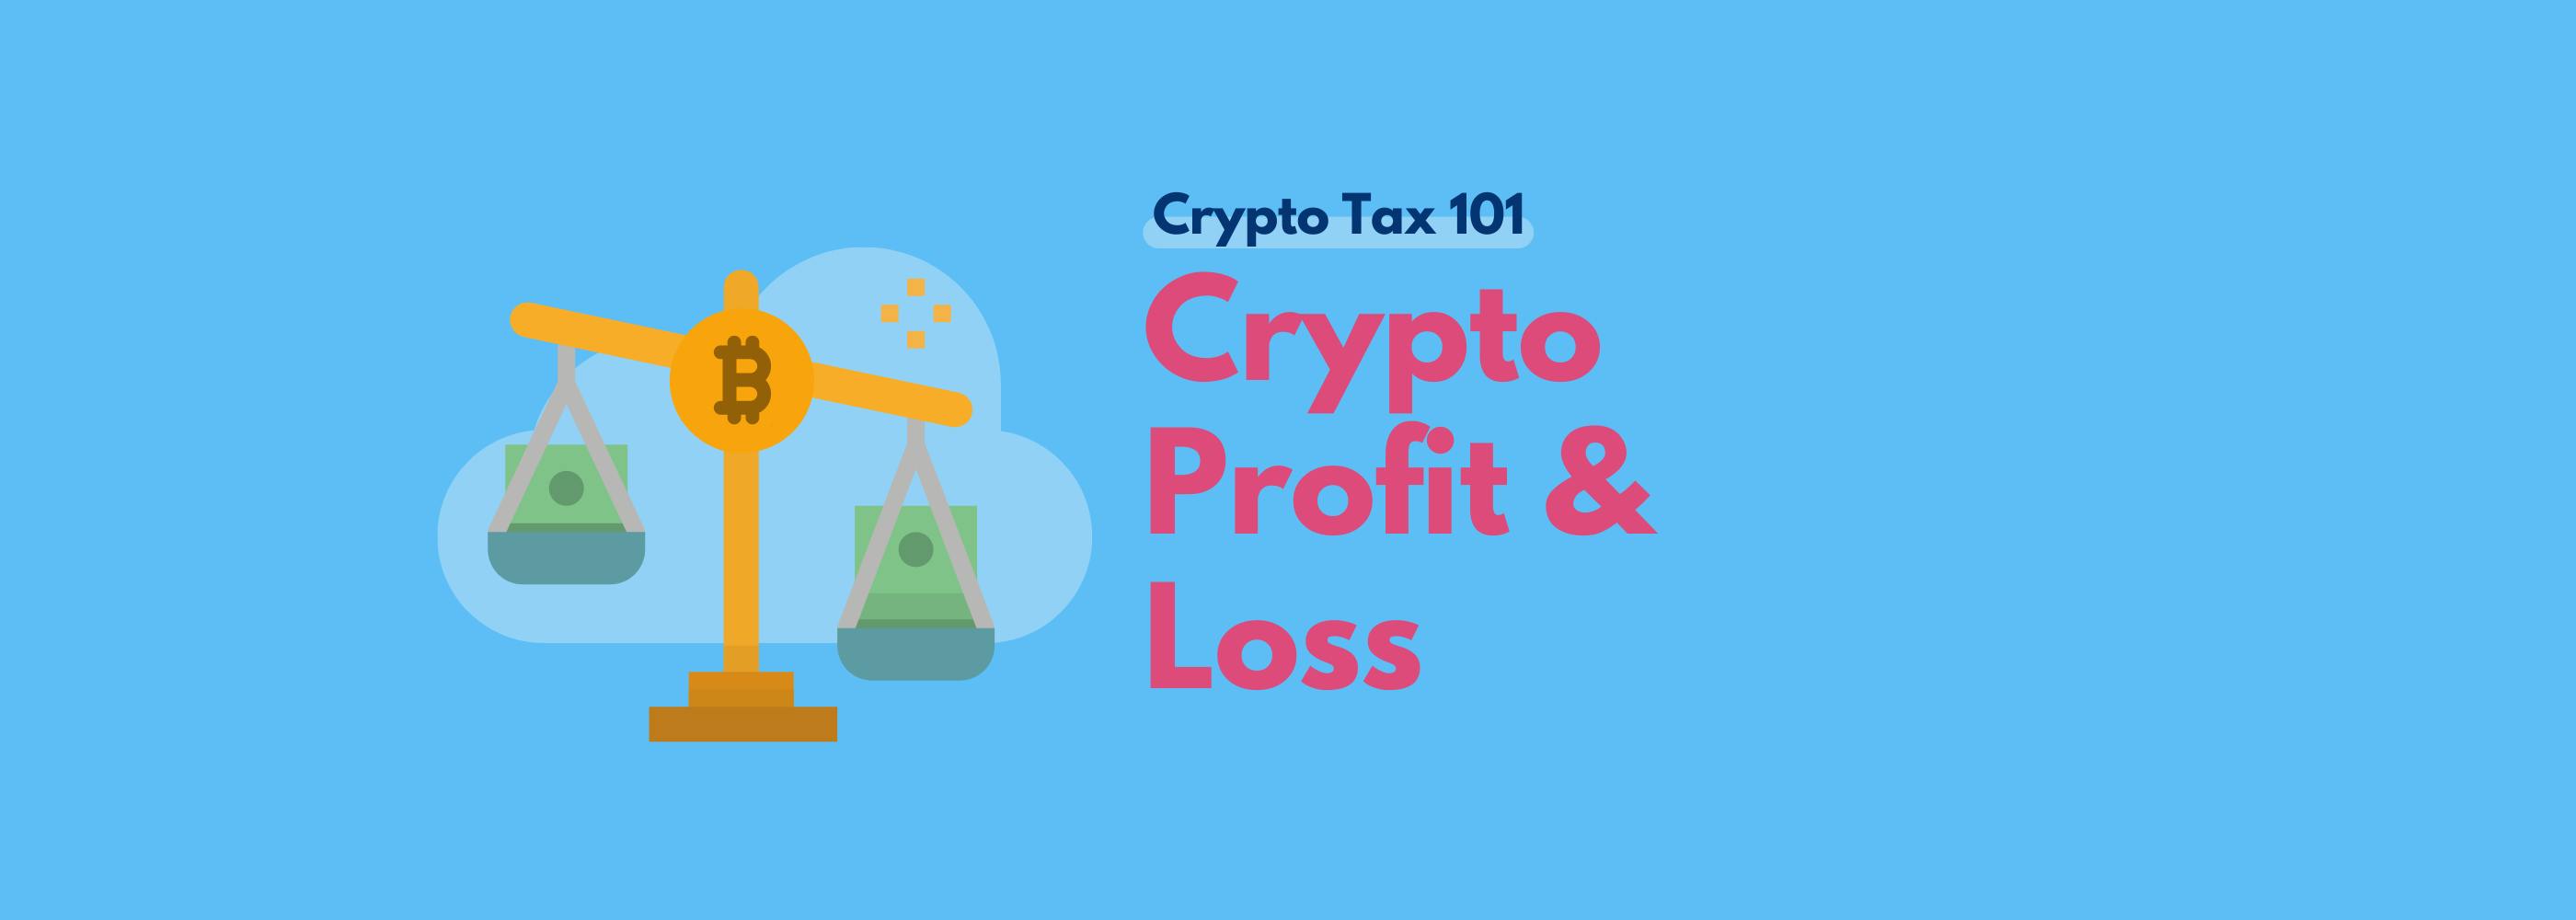 Koinly crypto tax calculator - profit and loss